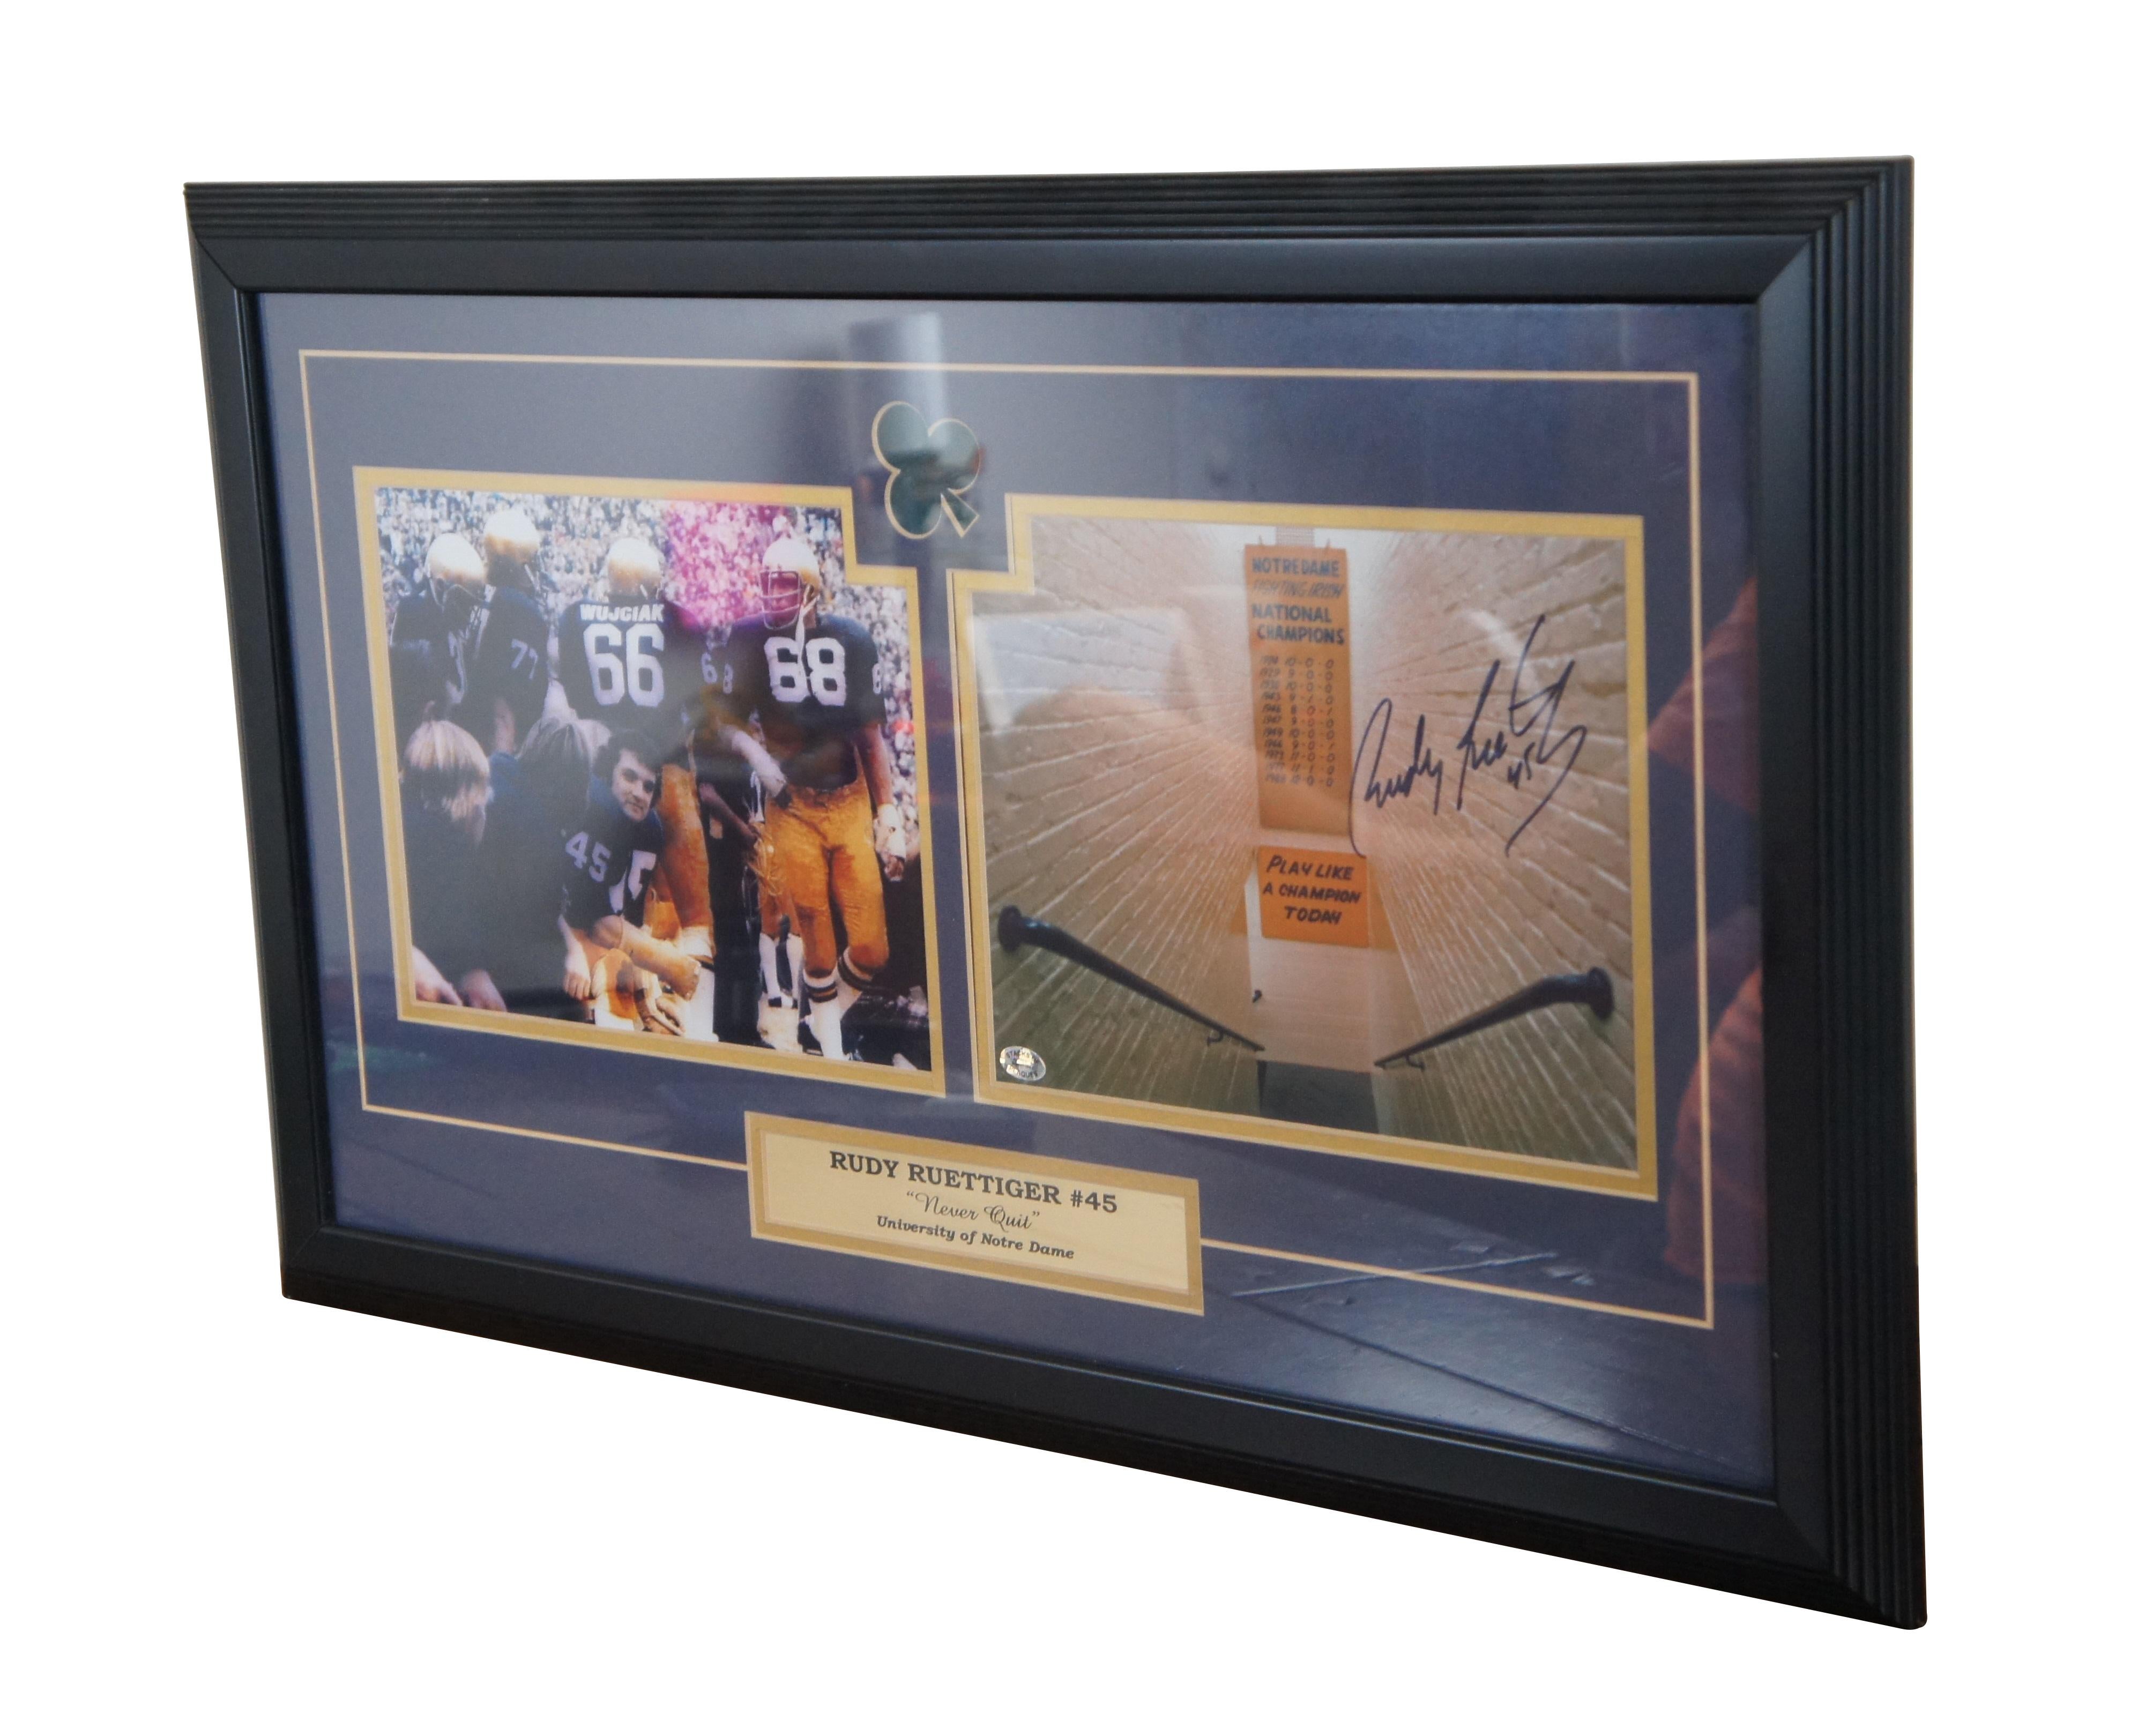 Vintage Rudy Ruettiger #45 Never Quit University of Notre Dame Fighting Irish Football signed / framed autographed photo plaque.

Dimensions:
26.75